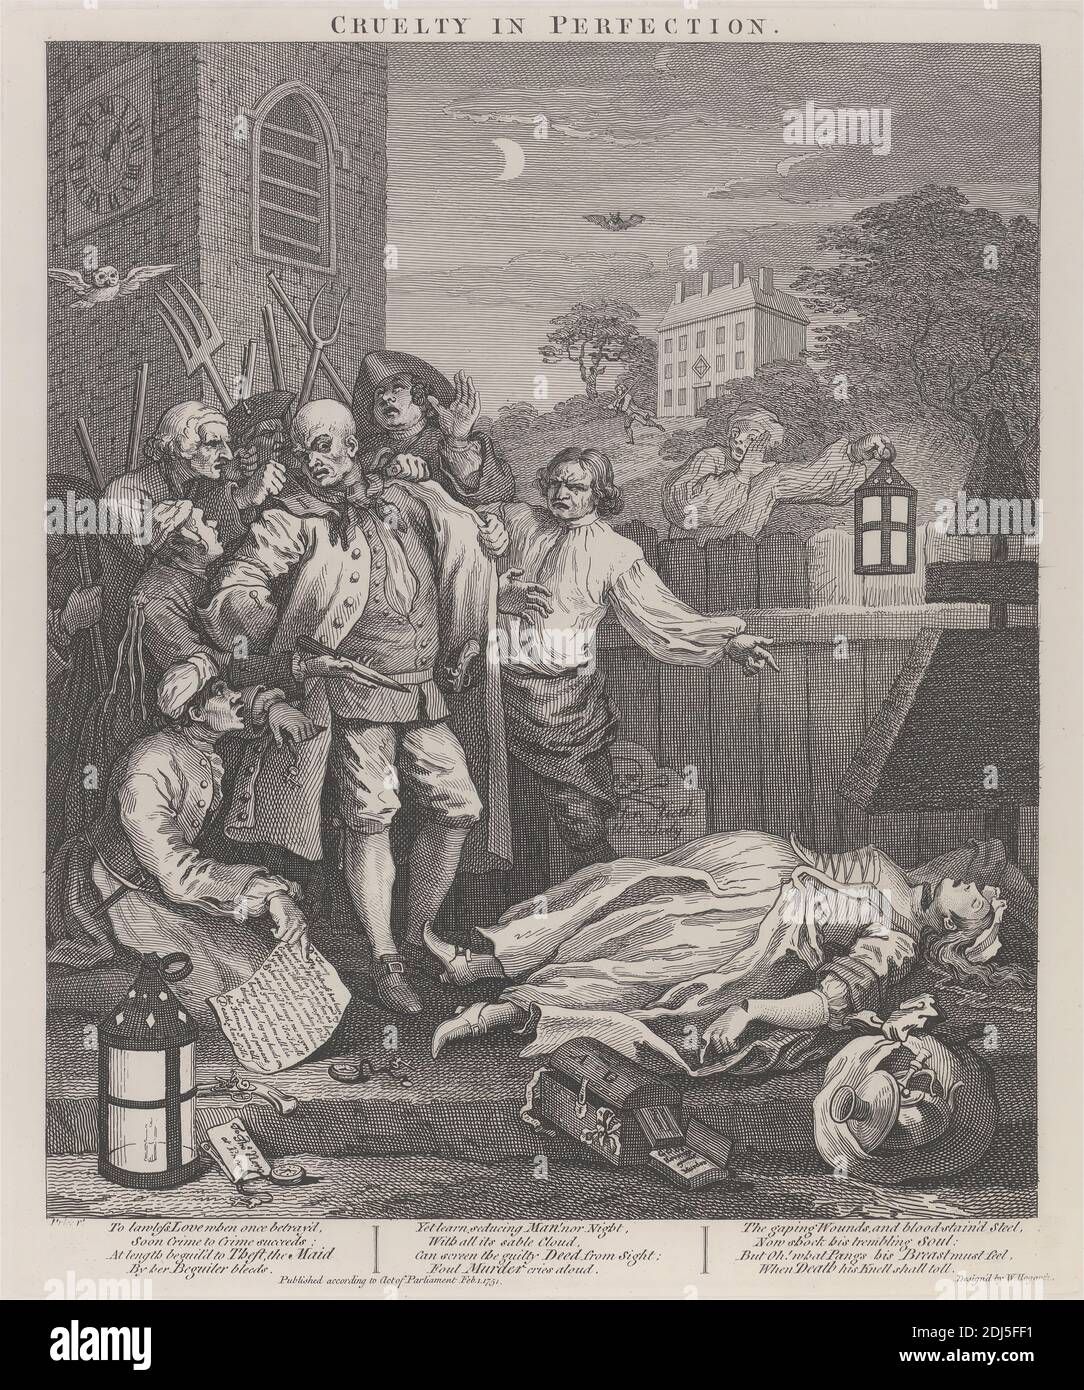 The Third Stage of Cruelty: Cruelty in Perfection - The Murder, Print made by William Hogarth, 1697–1764, British, 1751, printed 1790, Line engraving on thick, white, smooth wove paper, Sheet: 24 7/8 x 19 1/4 inches (63.2 x 48.9 cm), Plate: 15 1/4 x 12 3/4 inches (38.7 x 32.4 cm), and Image: 14 x 11 3/4 inches (35.6 x 29.8 cm), bat, cemetery, cruelty, dagger, death, genre subject, grave, graveyard, headstone, house, knife, lantern, men, moon, murder, night, owl, tombstone, topiary, torture, trees Stock Photo